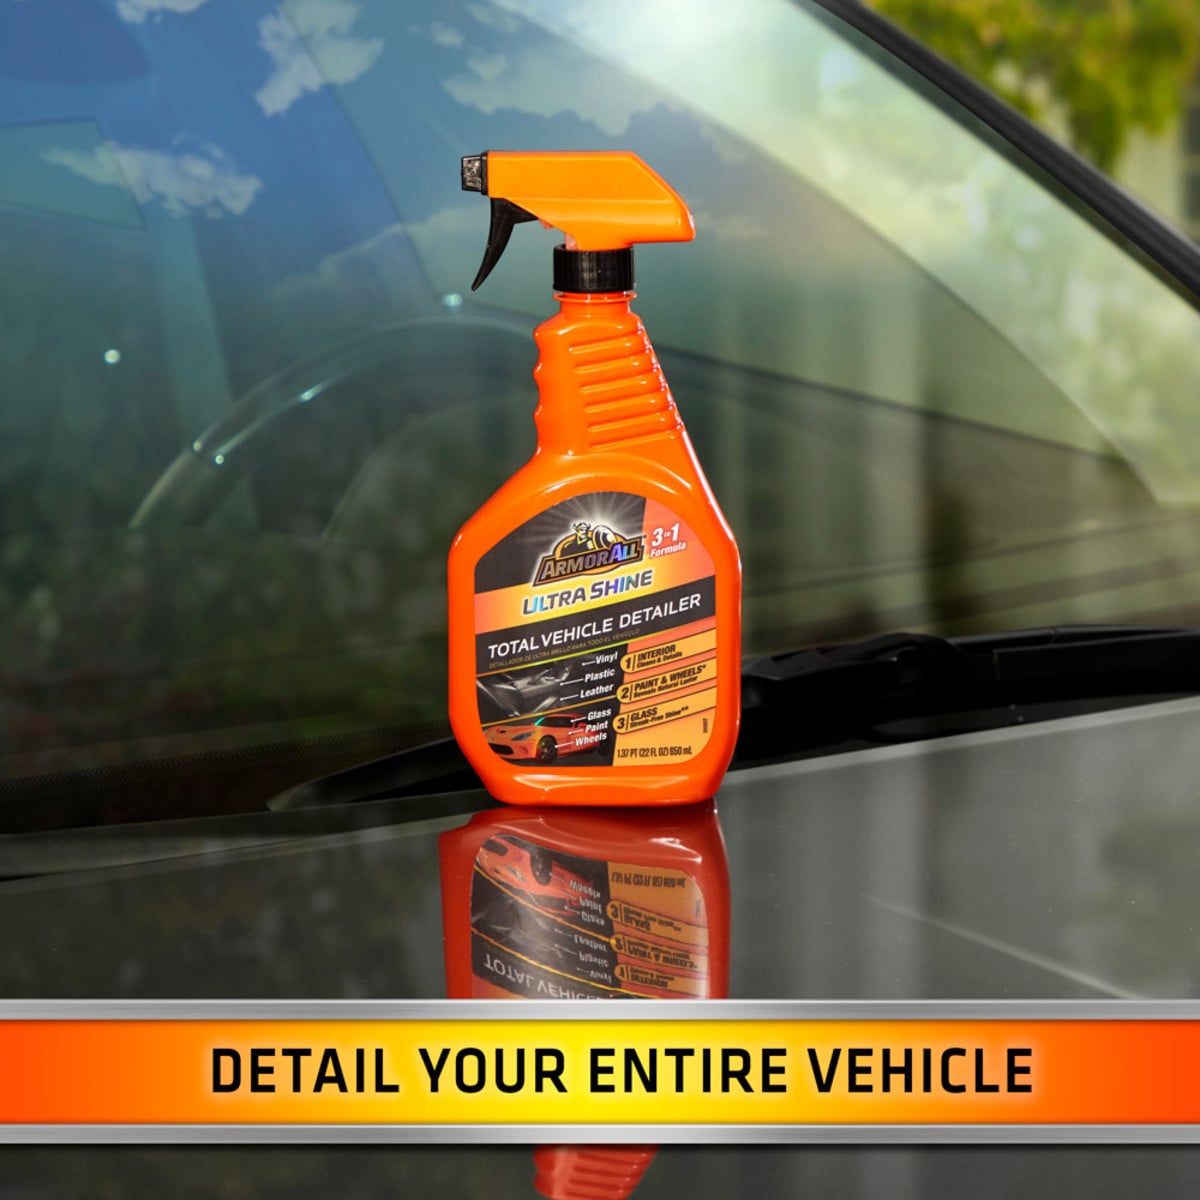 Armor All Ultra Shine Total Vehicle Detailer by Armor All, Car Detailer  Spray for Interior and Exterior Use, 22 Fl Oz